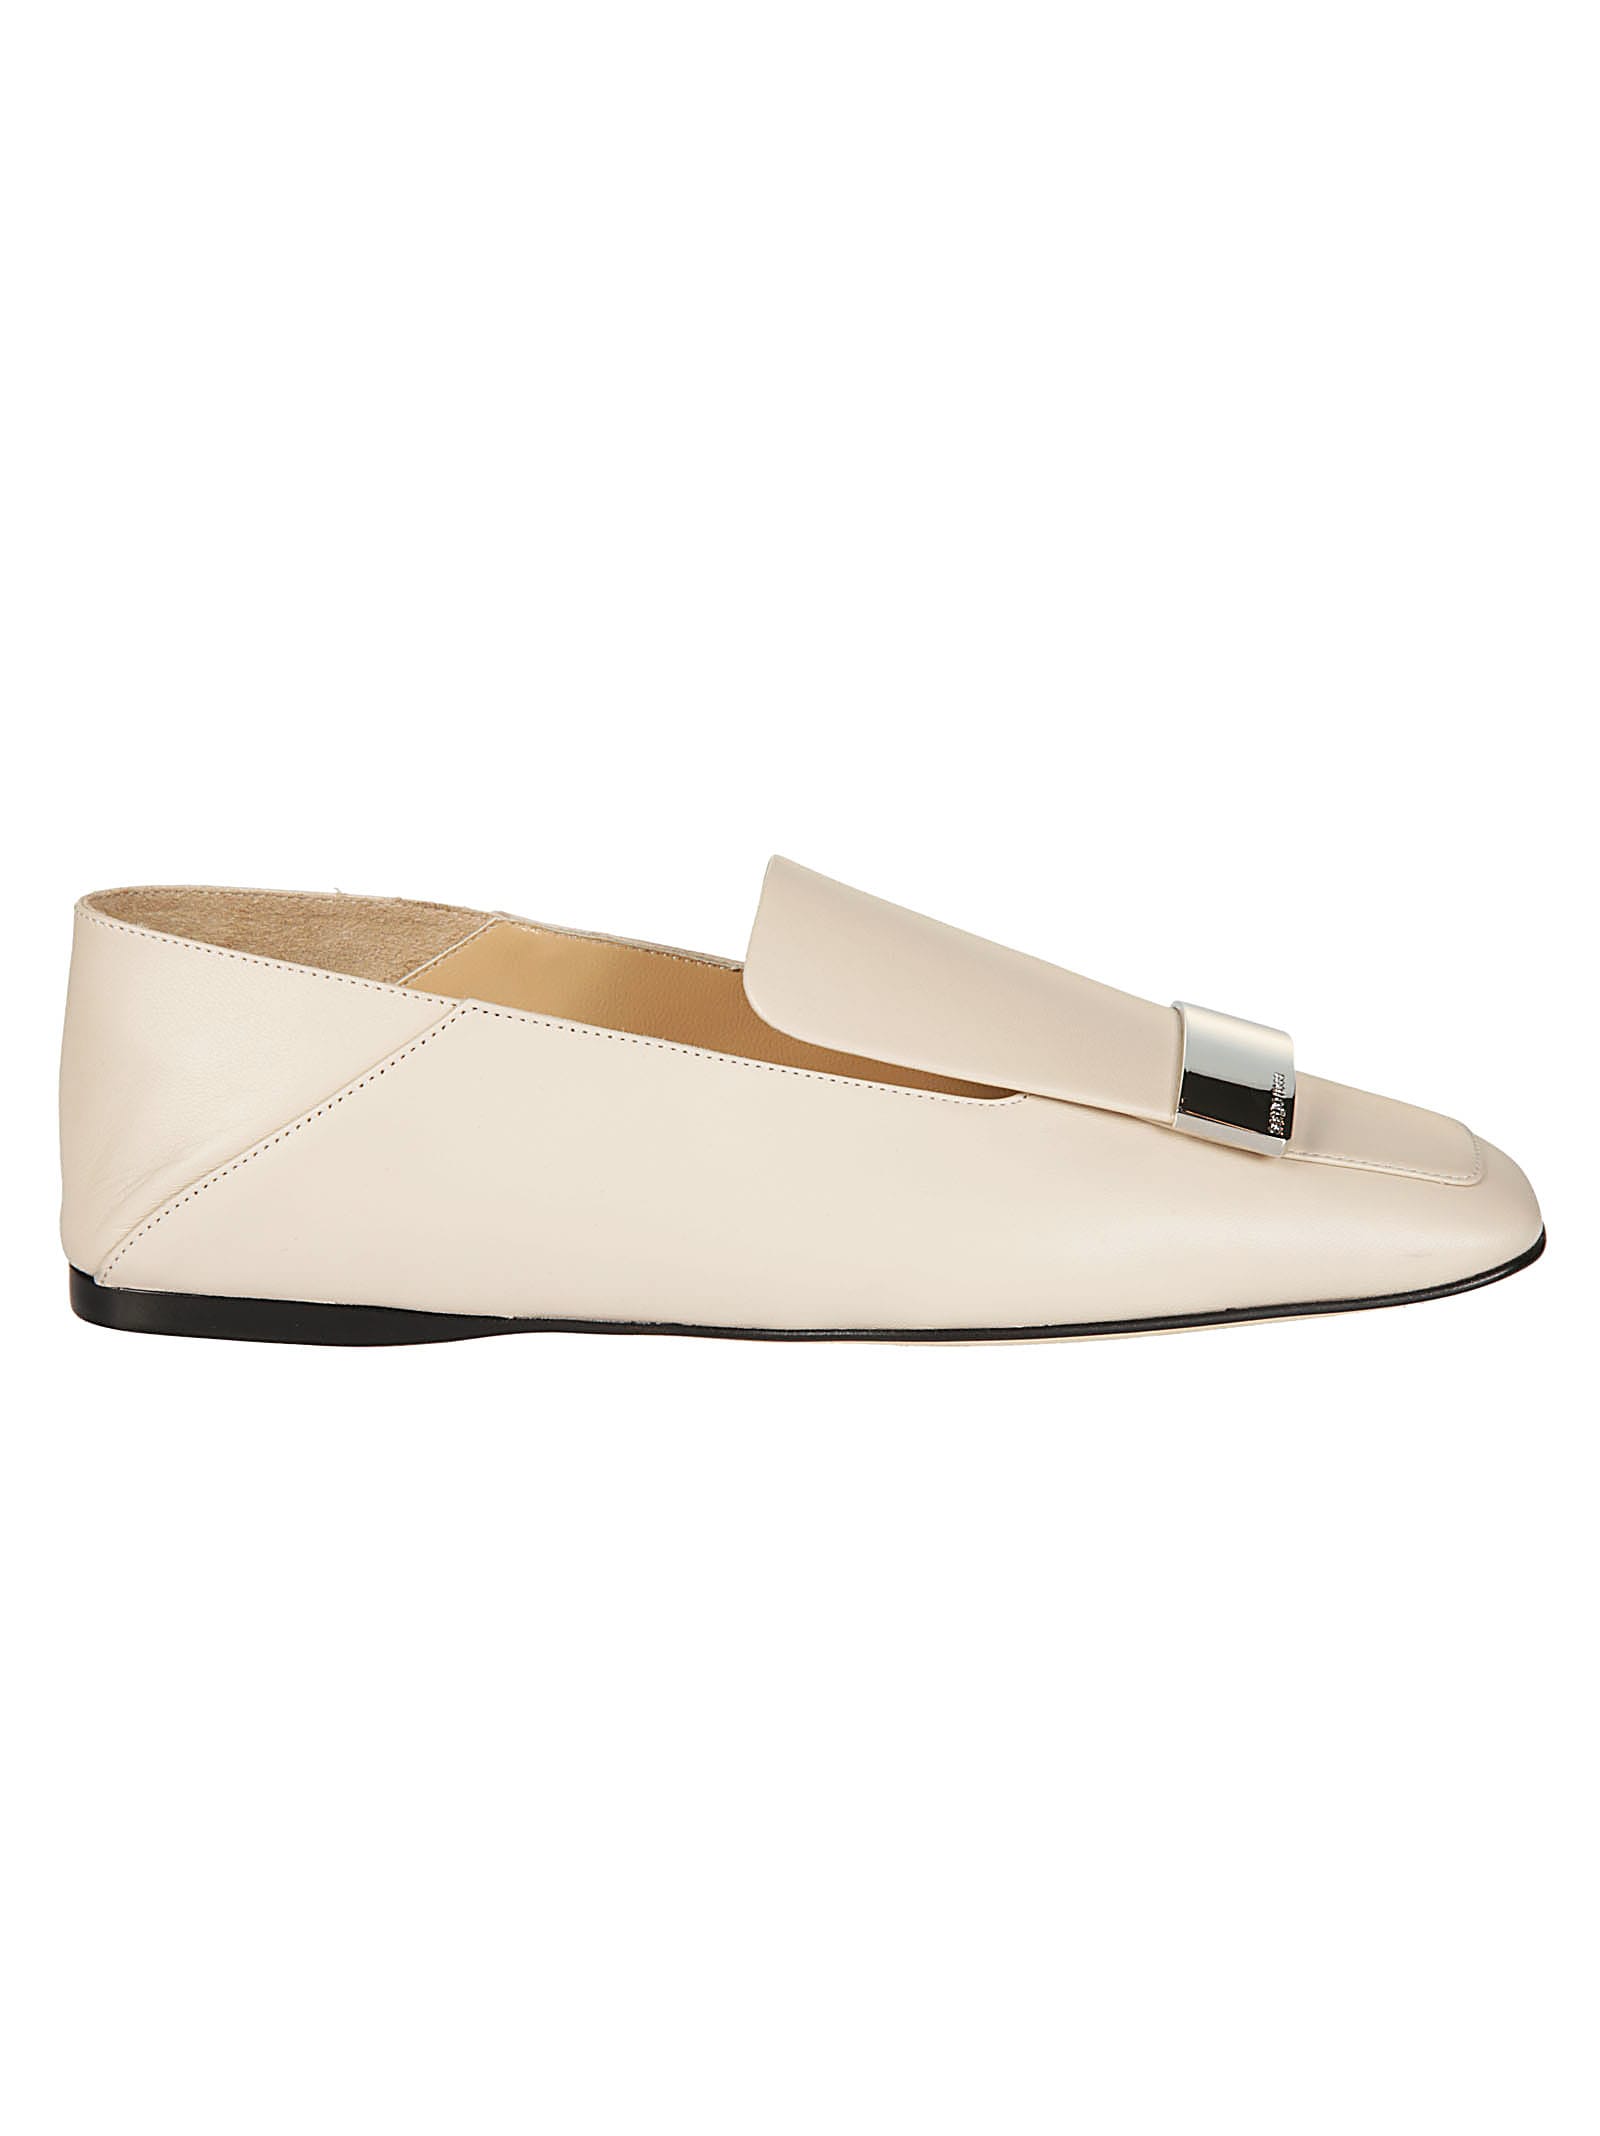 Buy Sergio Rossi Classic Slippers online, shop Sergio Rossi shoes with free shipping